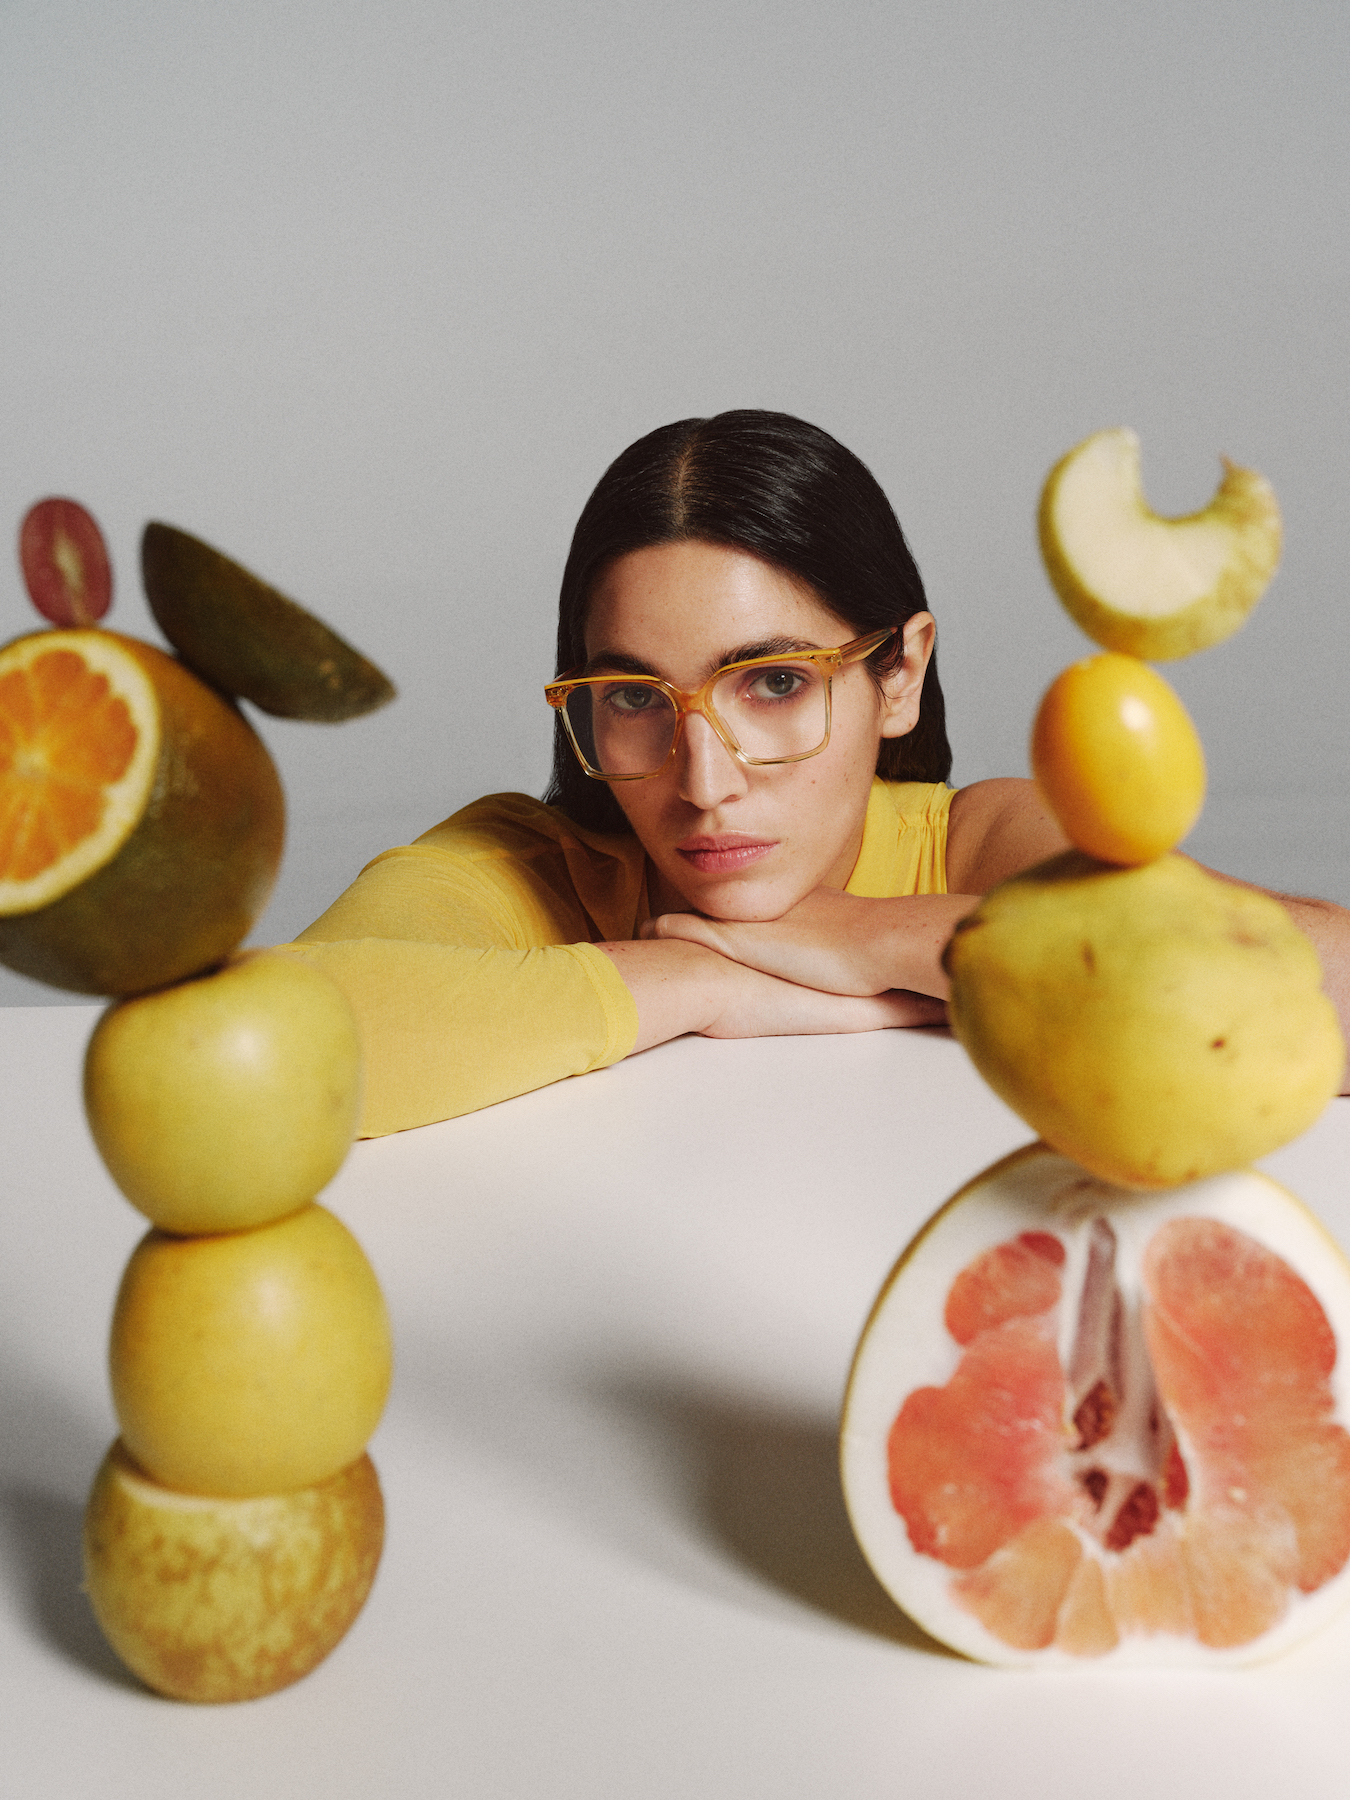 Launch of Innovative Eyewear Collection Inspired by the Abundance of Fruits